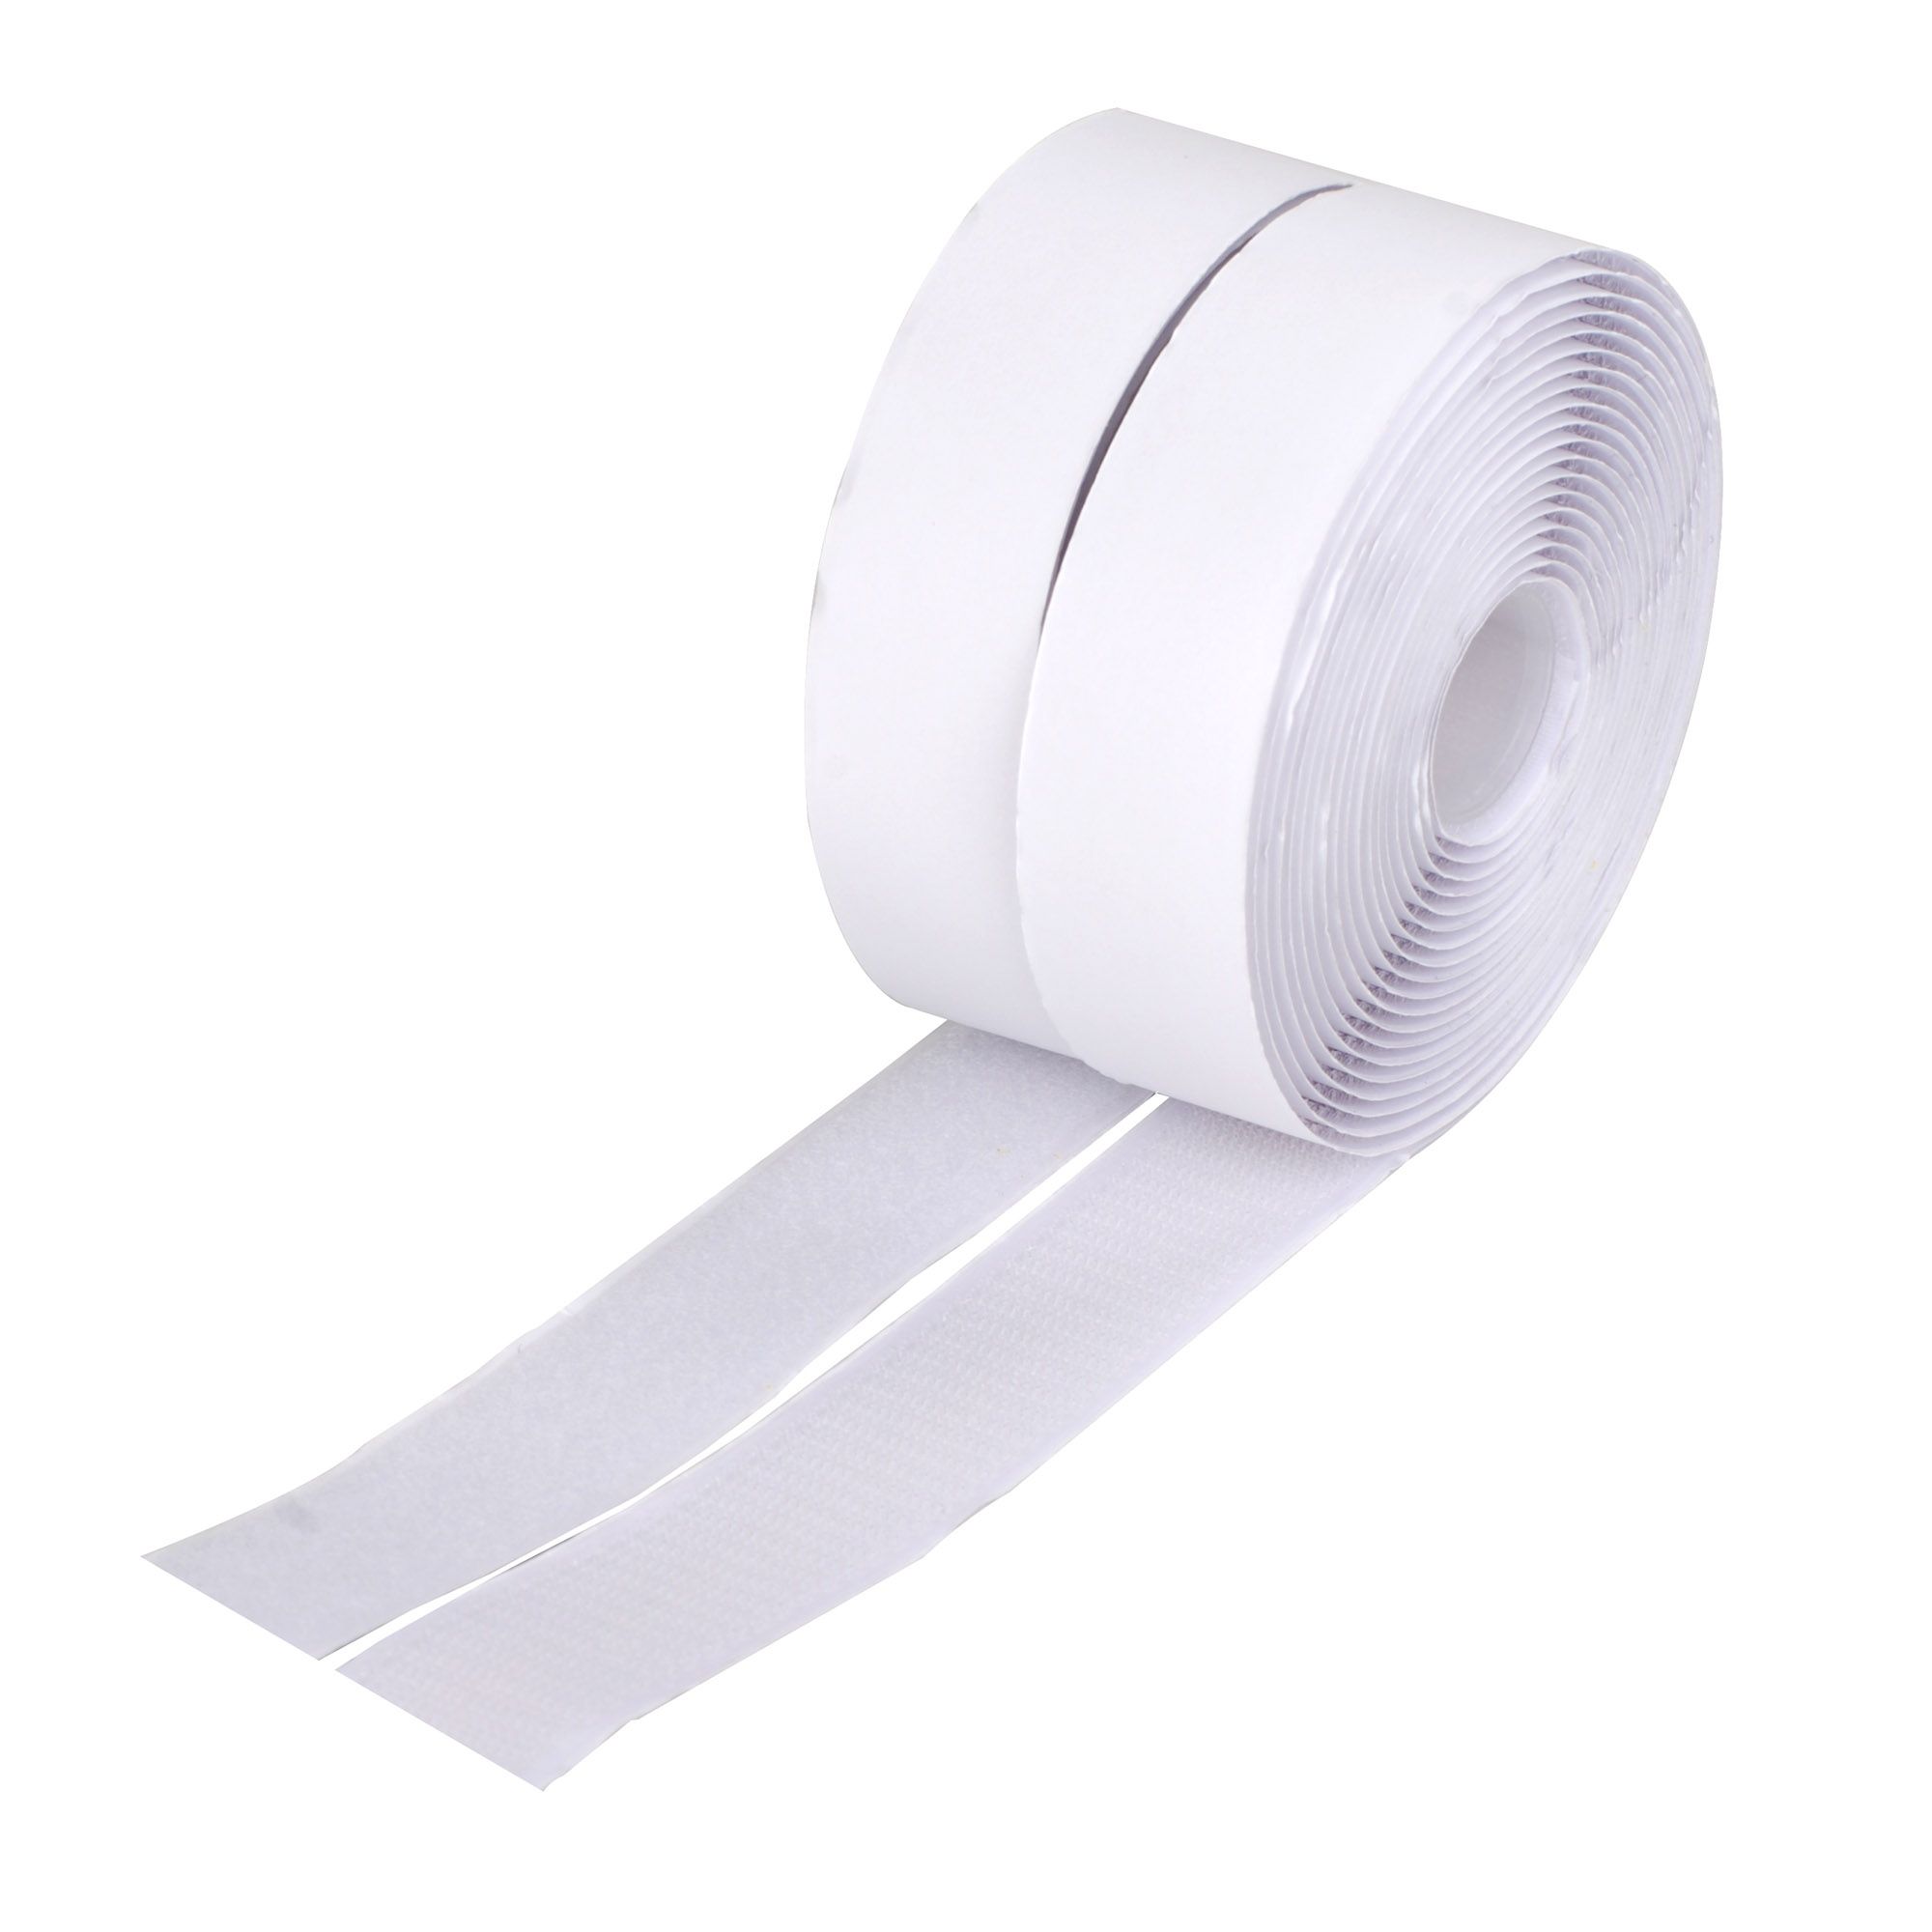 Velcro White Hook & Loop Tape, 16mm x 16mm - RS Components Vietnam